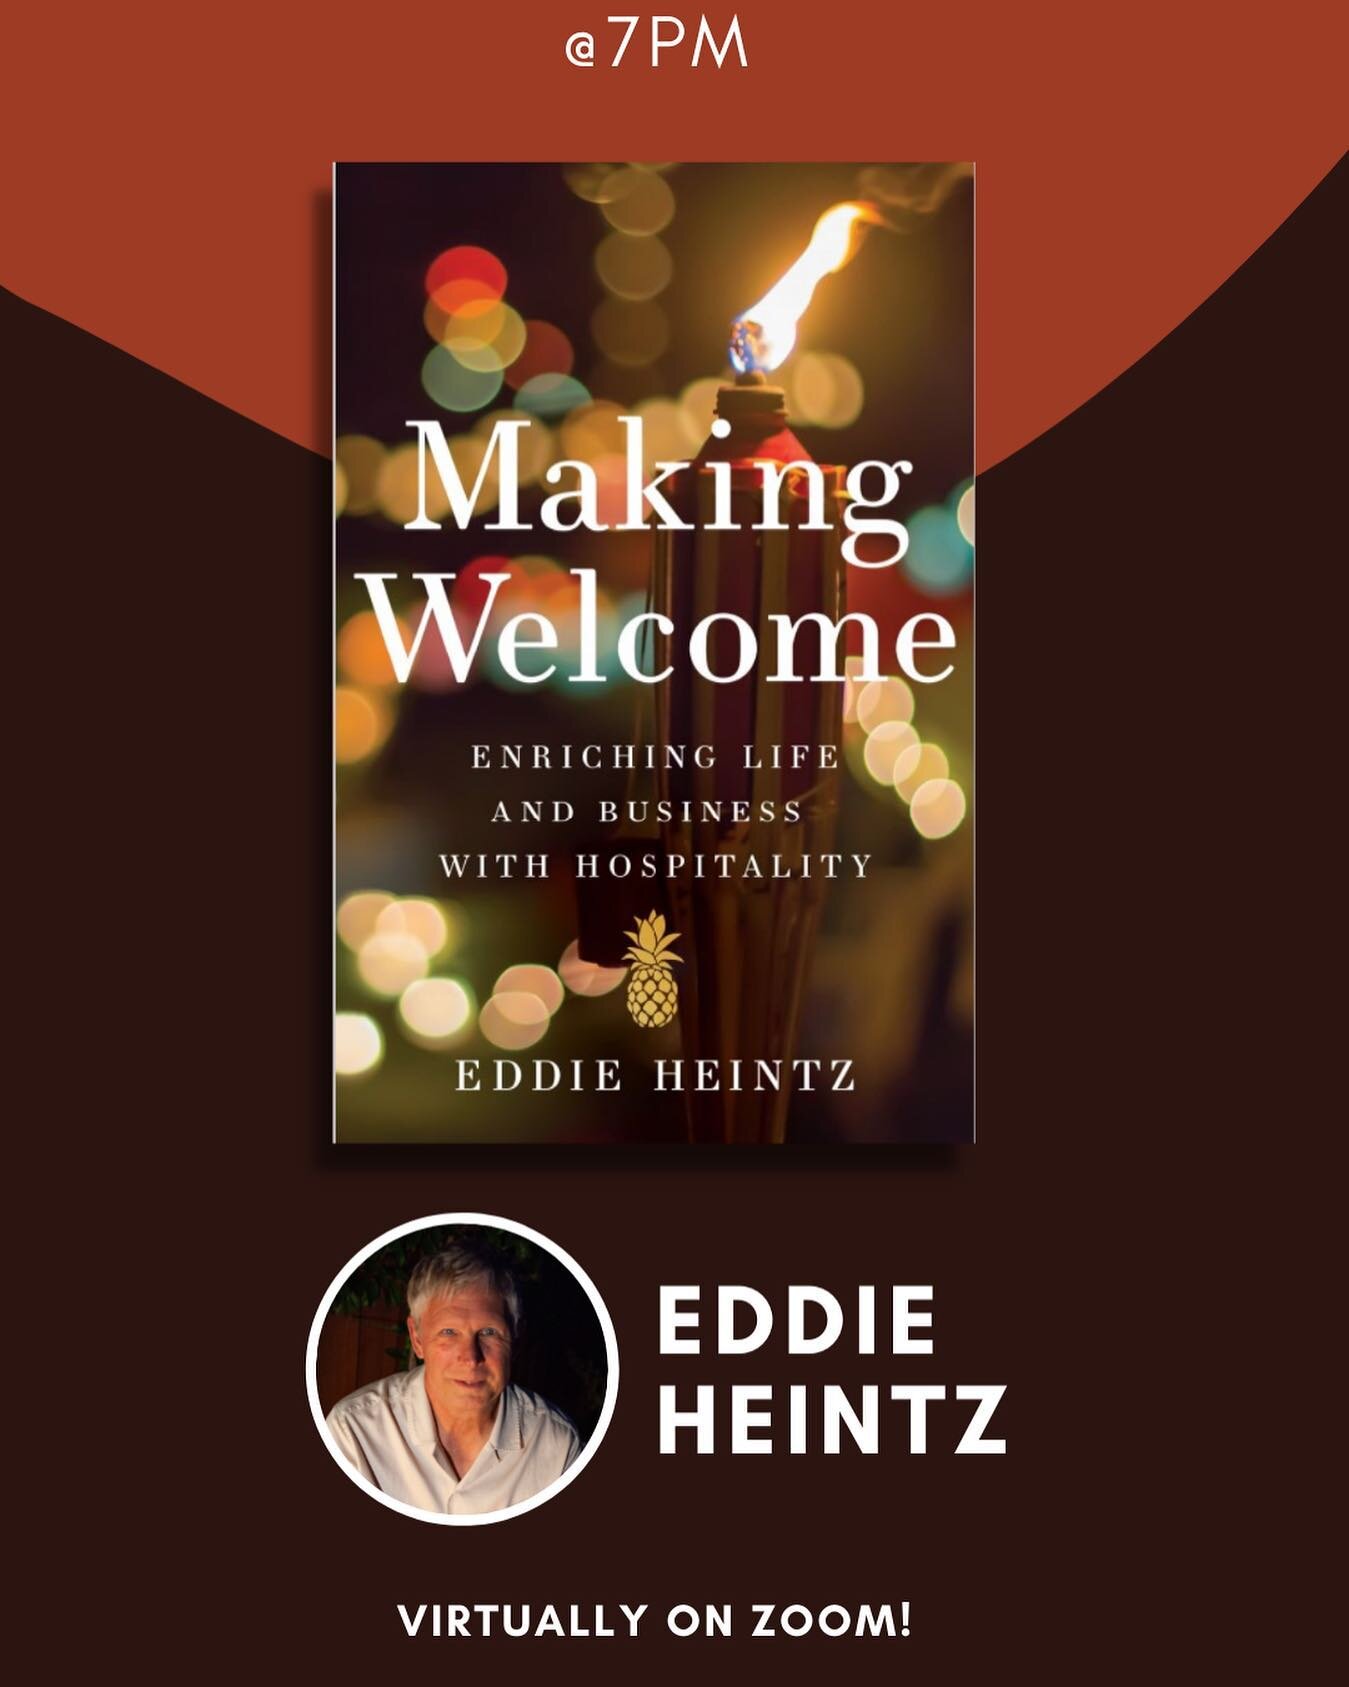 Save the date!!! Join me for a lively discussion and reading of Making Welcome. @napabookmine has been kind enough to set up a Zoom on their website on April 5th at 7pm Pacific Time. I&rsquo;m very excited!  Use the Eventbrite link to register and pi